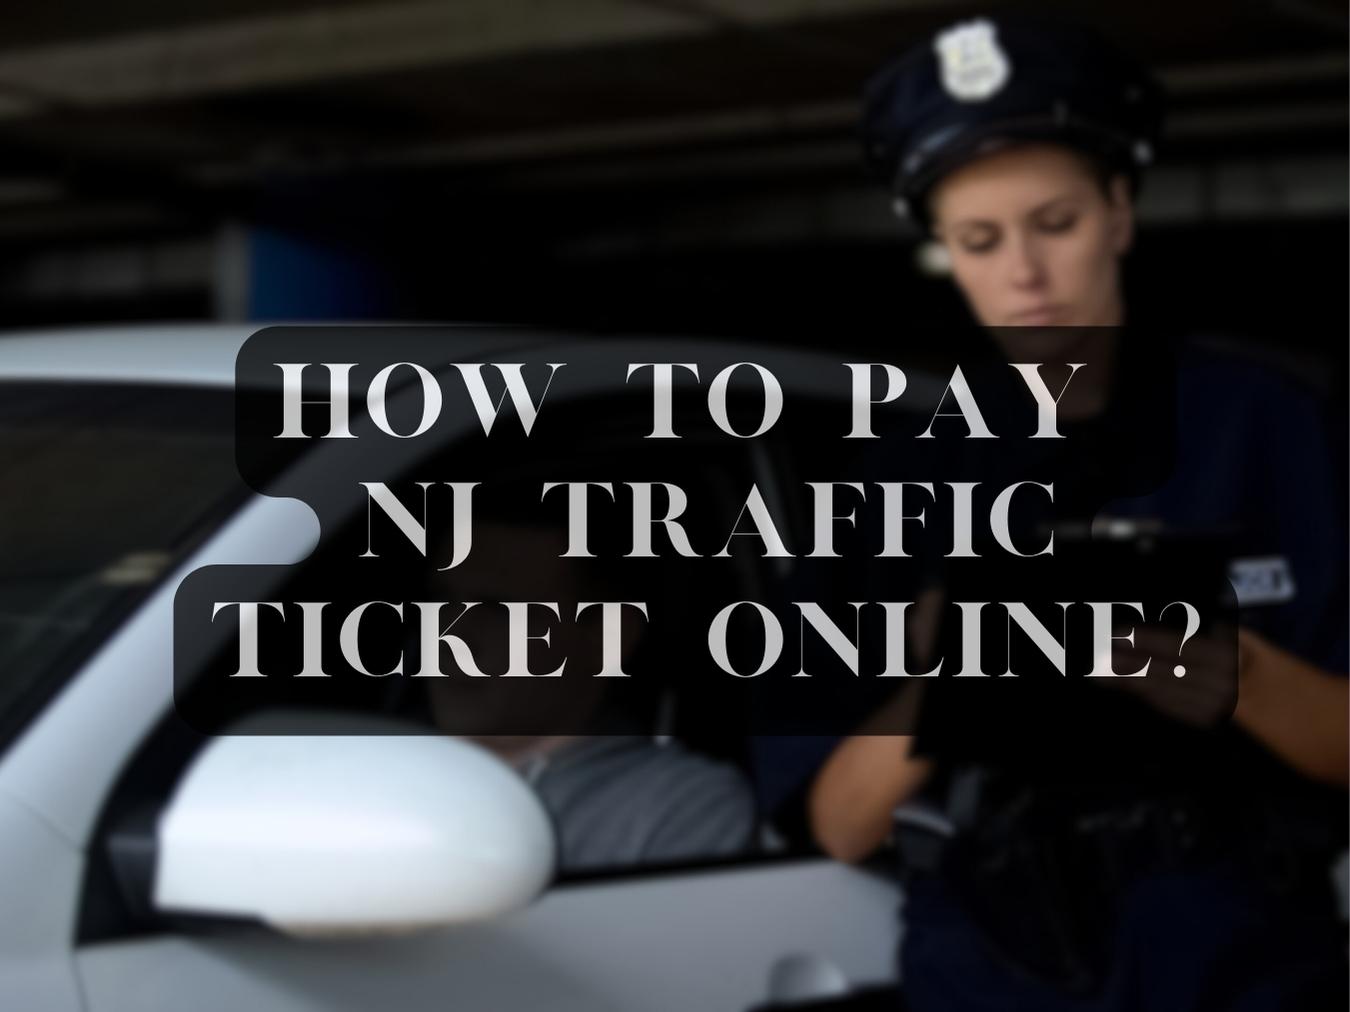 Pay NJ Traffic Ticket Online AT NJMCDIRECT